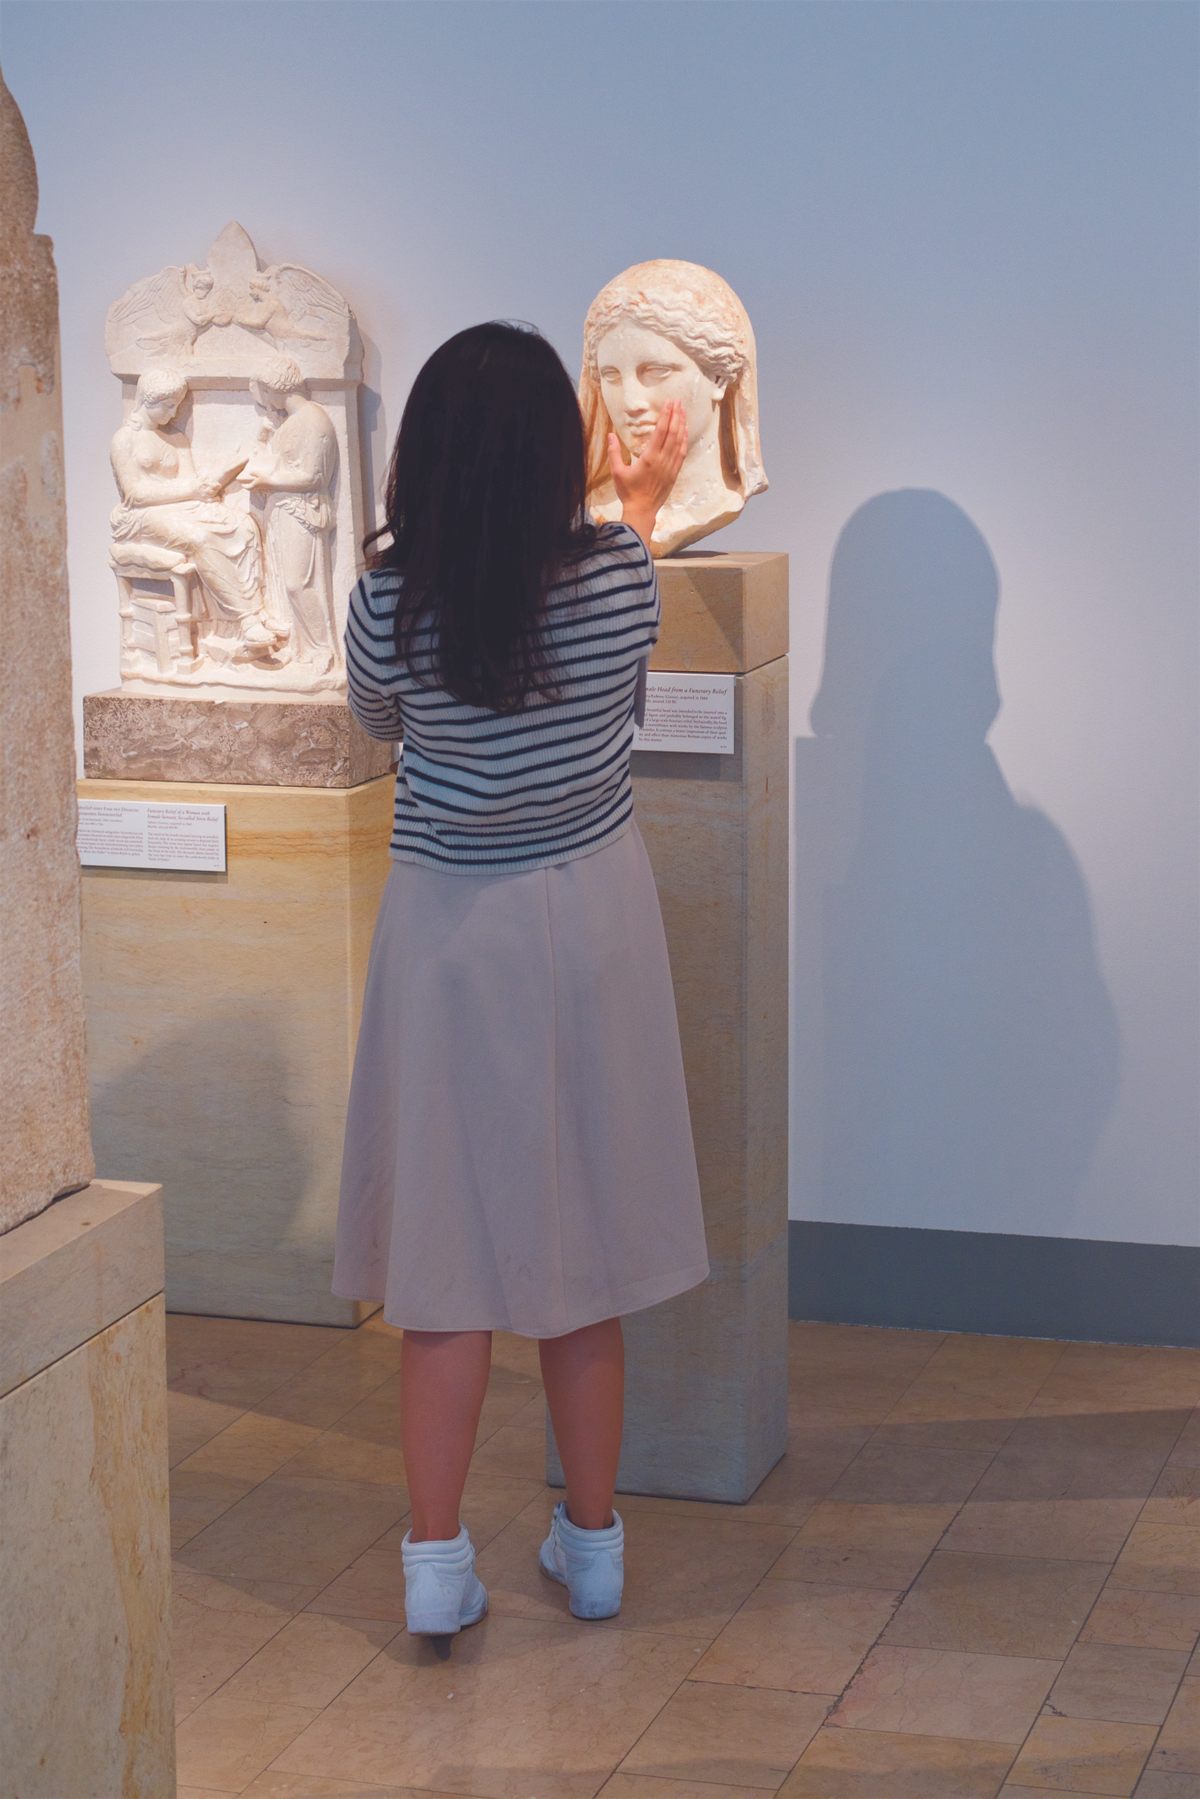 A visitor cuts the face of a bust at the Altes Museum in Berlin.